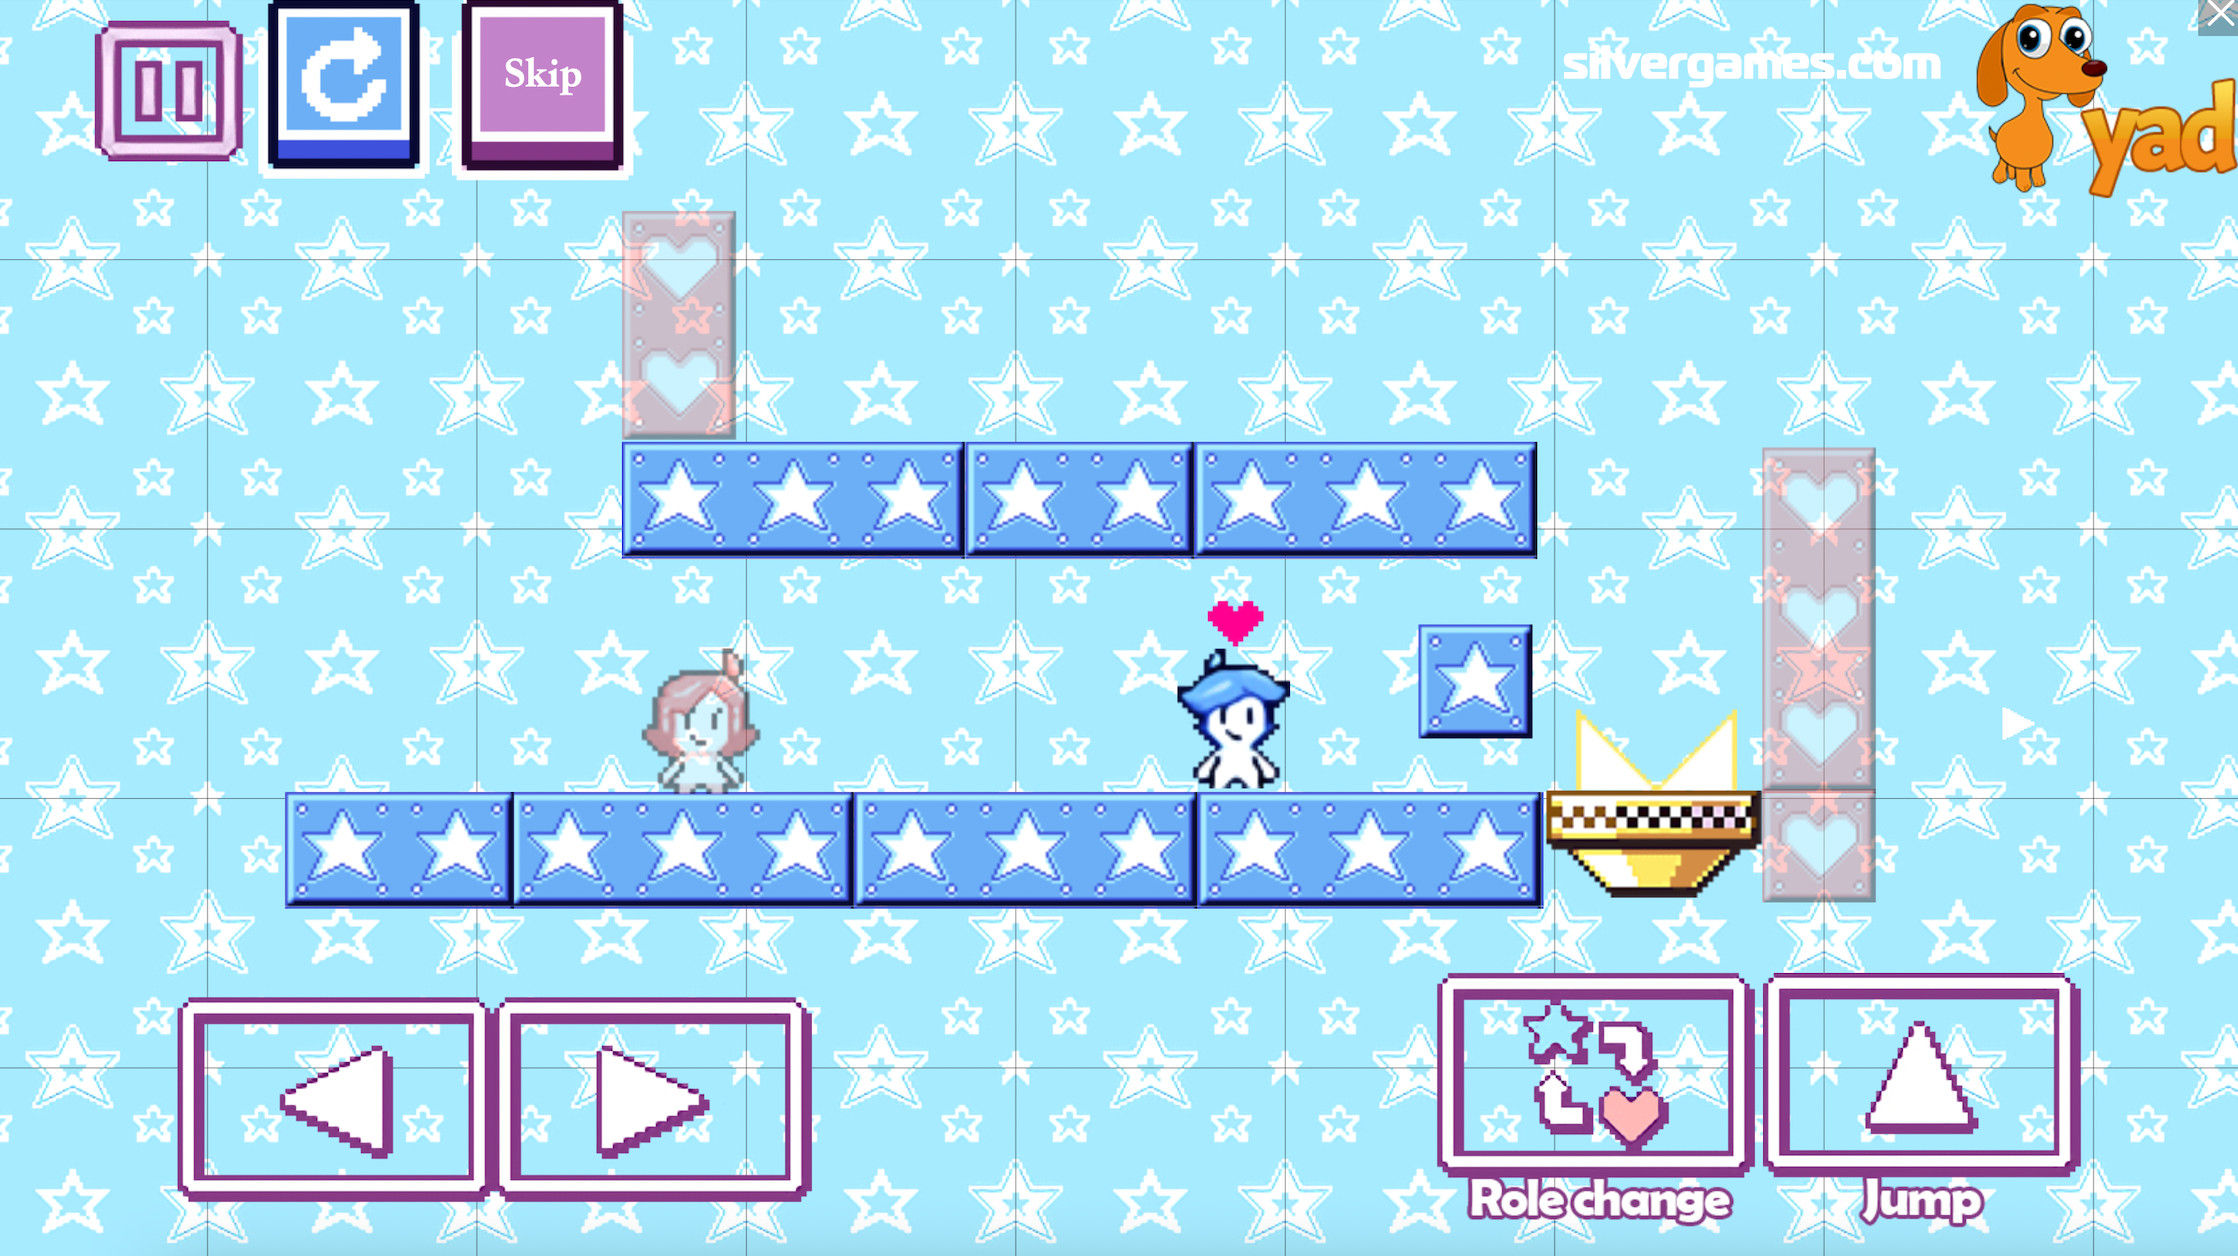 HEART STAR - Play Online for Free!